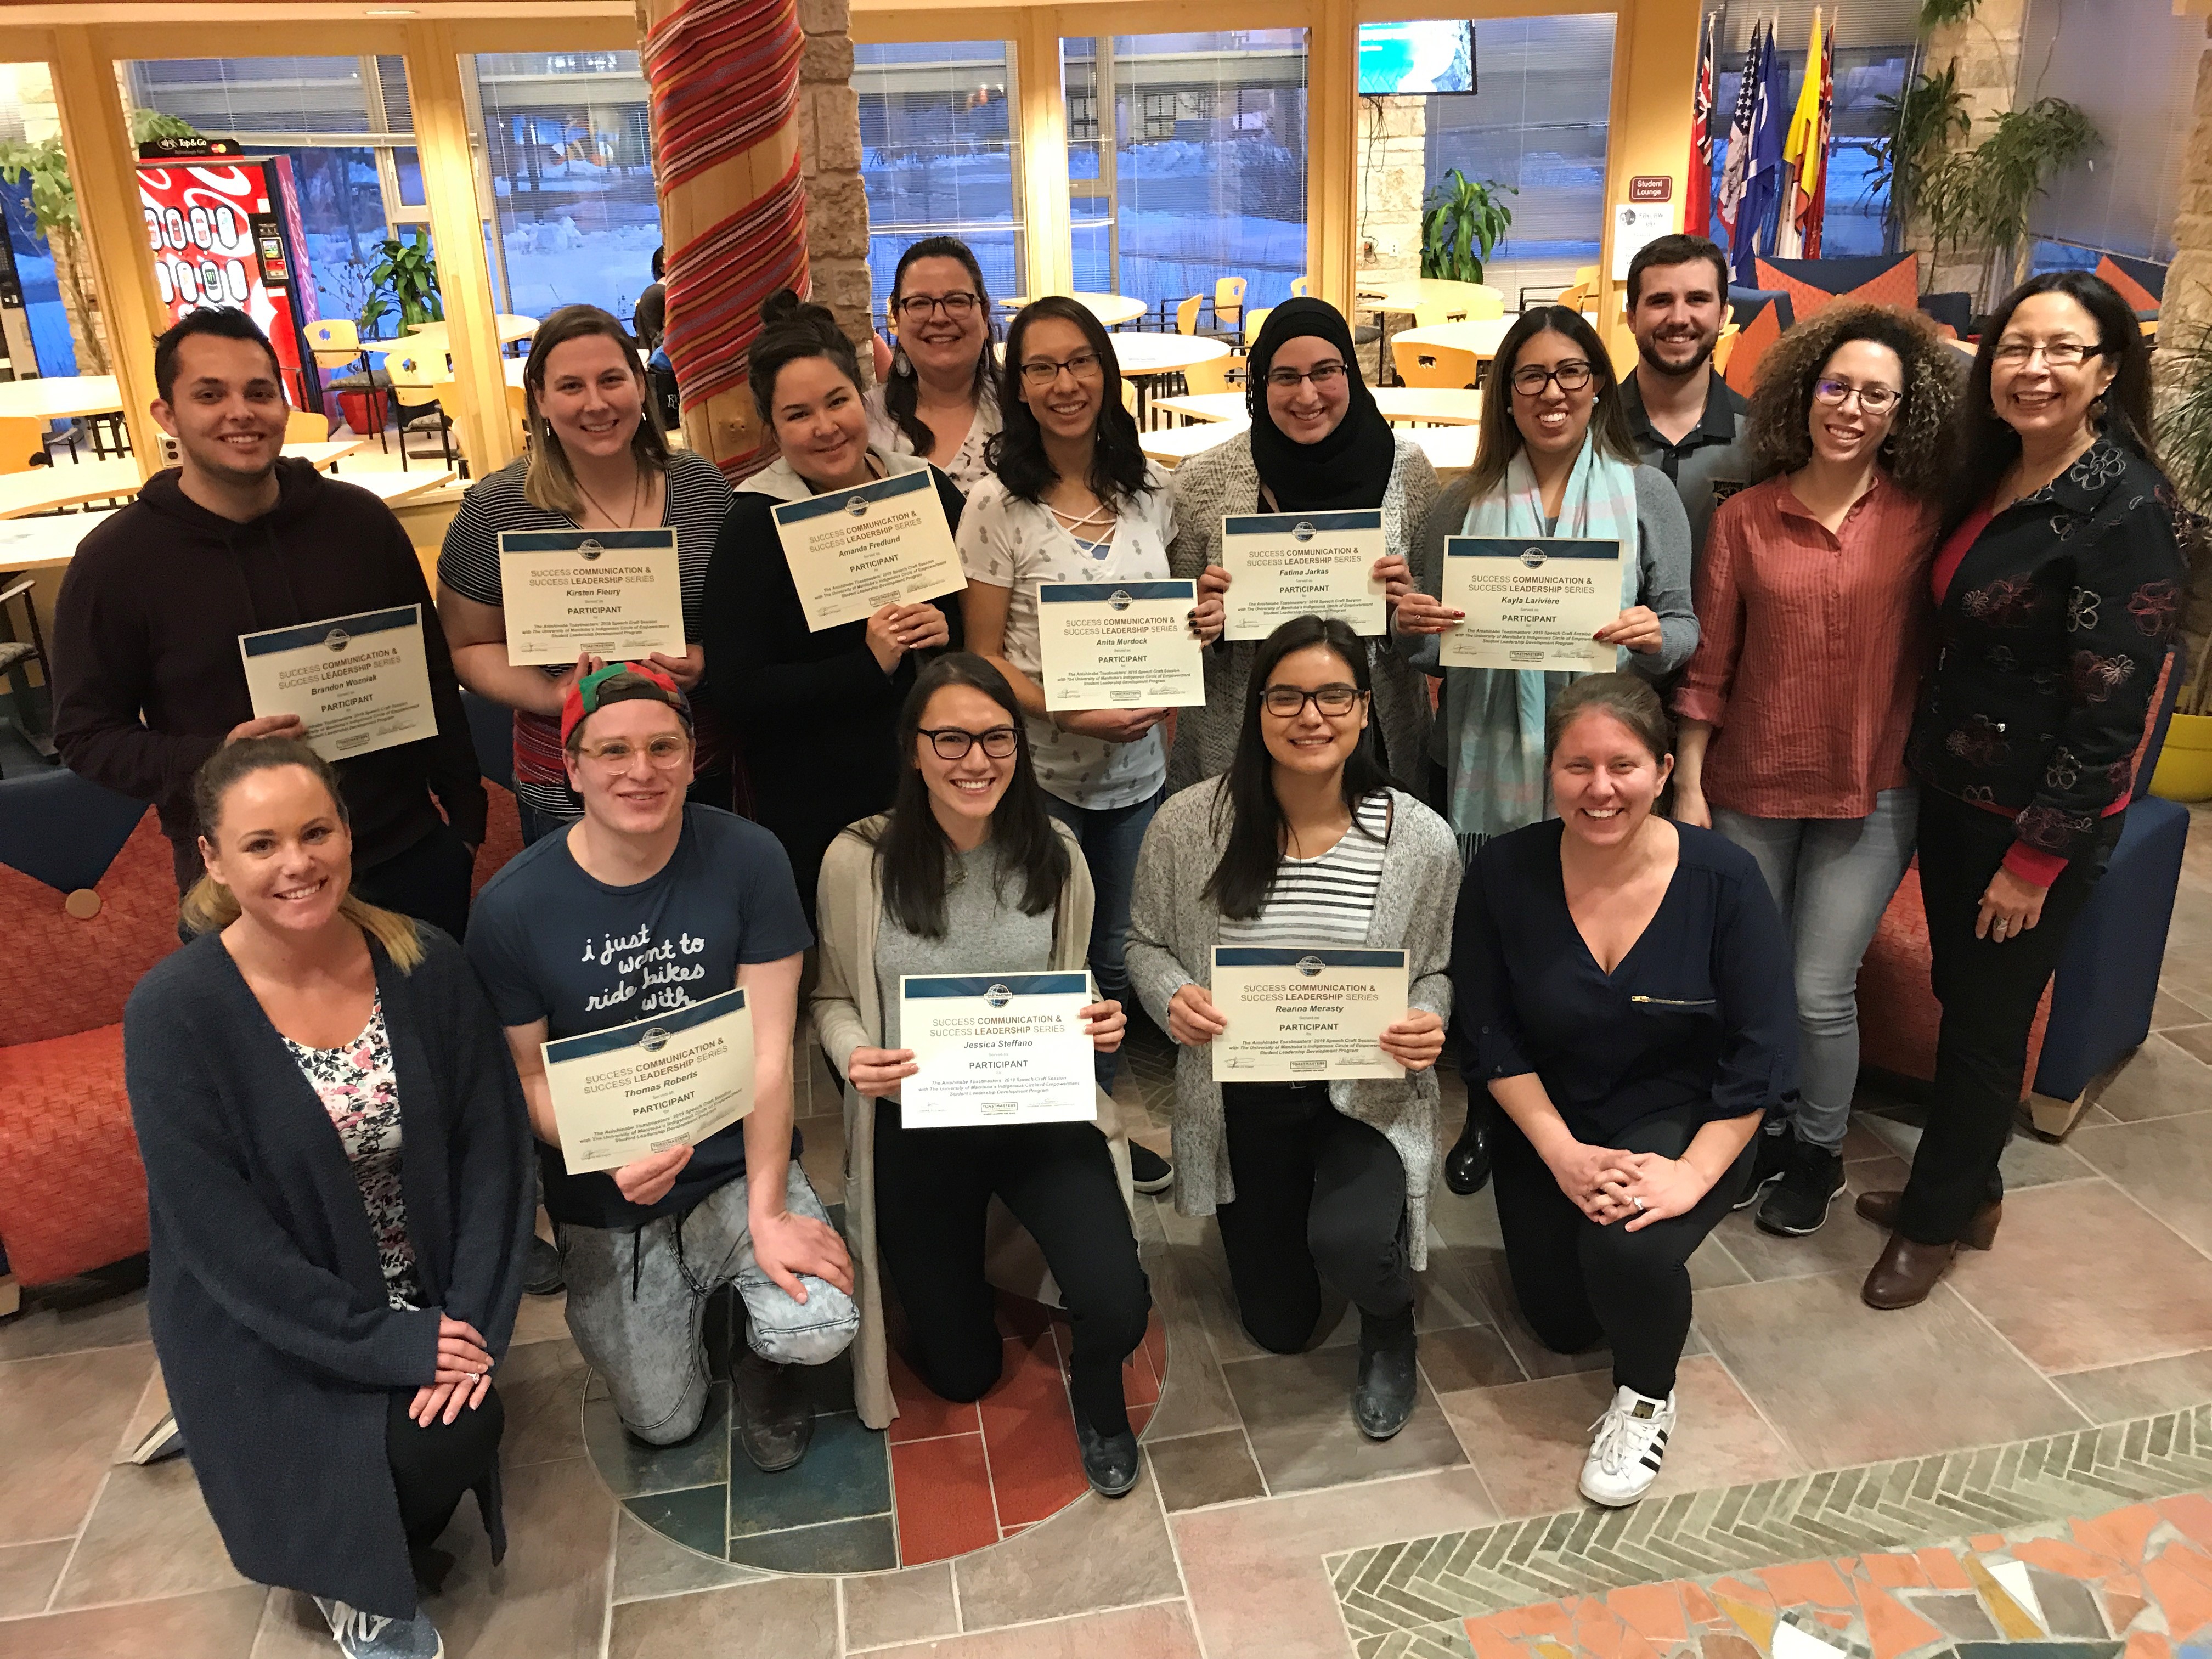 2.	ICE students and facilitators from the Anishinabe Toastmasters (Maya Simpson, Audrey Rirchard, Norma Spence, Carl Stone) after receiving their certificates for completing the Speech Craft program in public speaking.